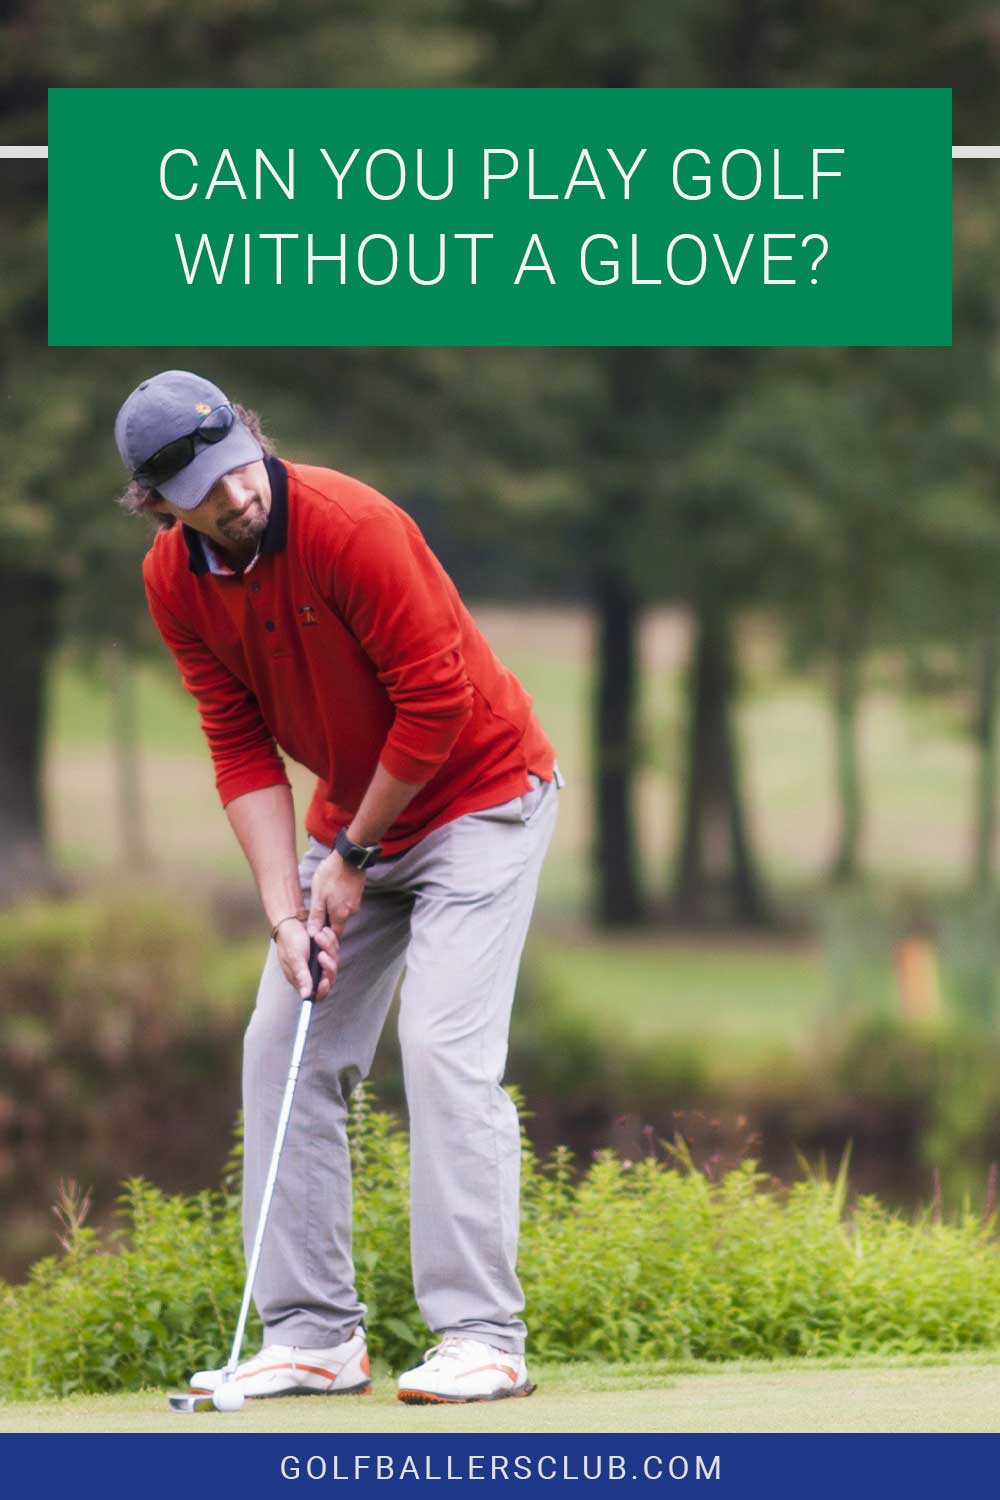 Man wearing red shirt taking a shot - Can You Play Golf Without A Glove?